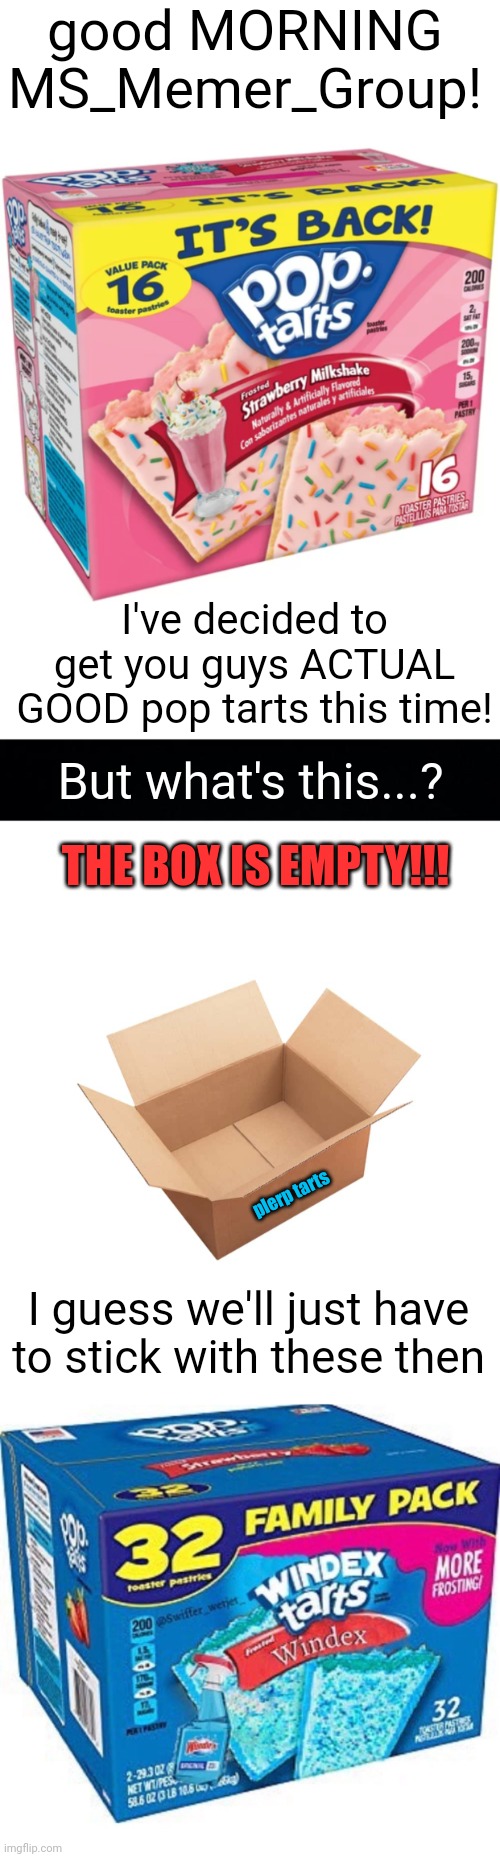 Meme #2,268 | good MORNING MS_Memer_Group! I've decided to get you guys ACTUAL GOOD pop tarts this time! But what's this...? THE BOX IS EMPTY!!! plerp tarts; I guess we'll just have to stick with these then | image tagged in pop tarts,gordon ramsay some good food,msmg,good morning,surprise,yummy yum | made w/ Imgflip meme maker